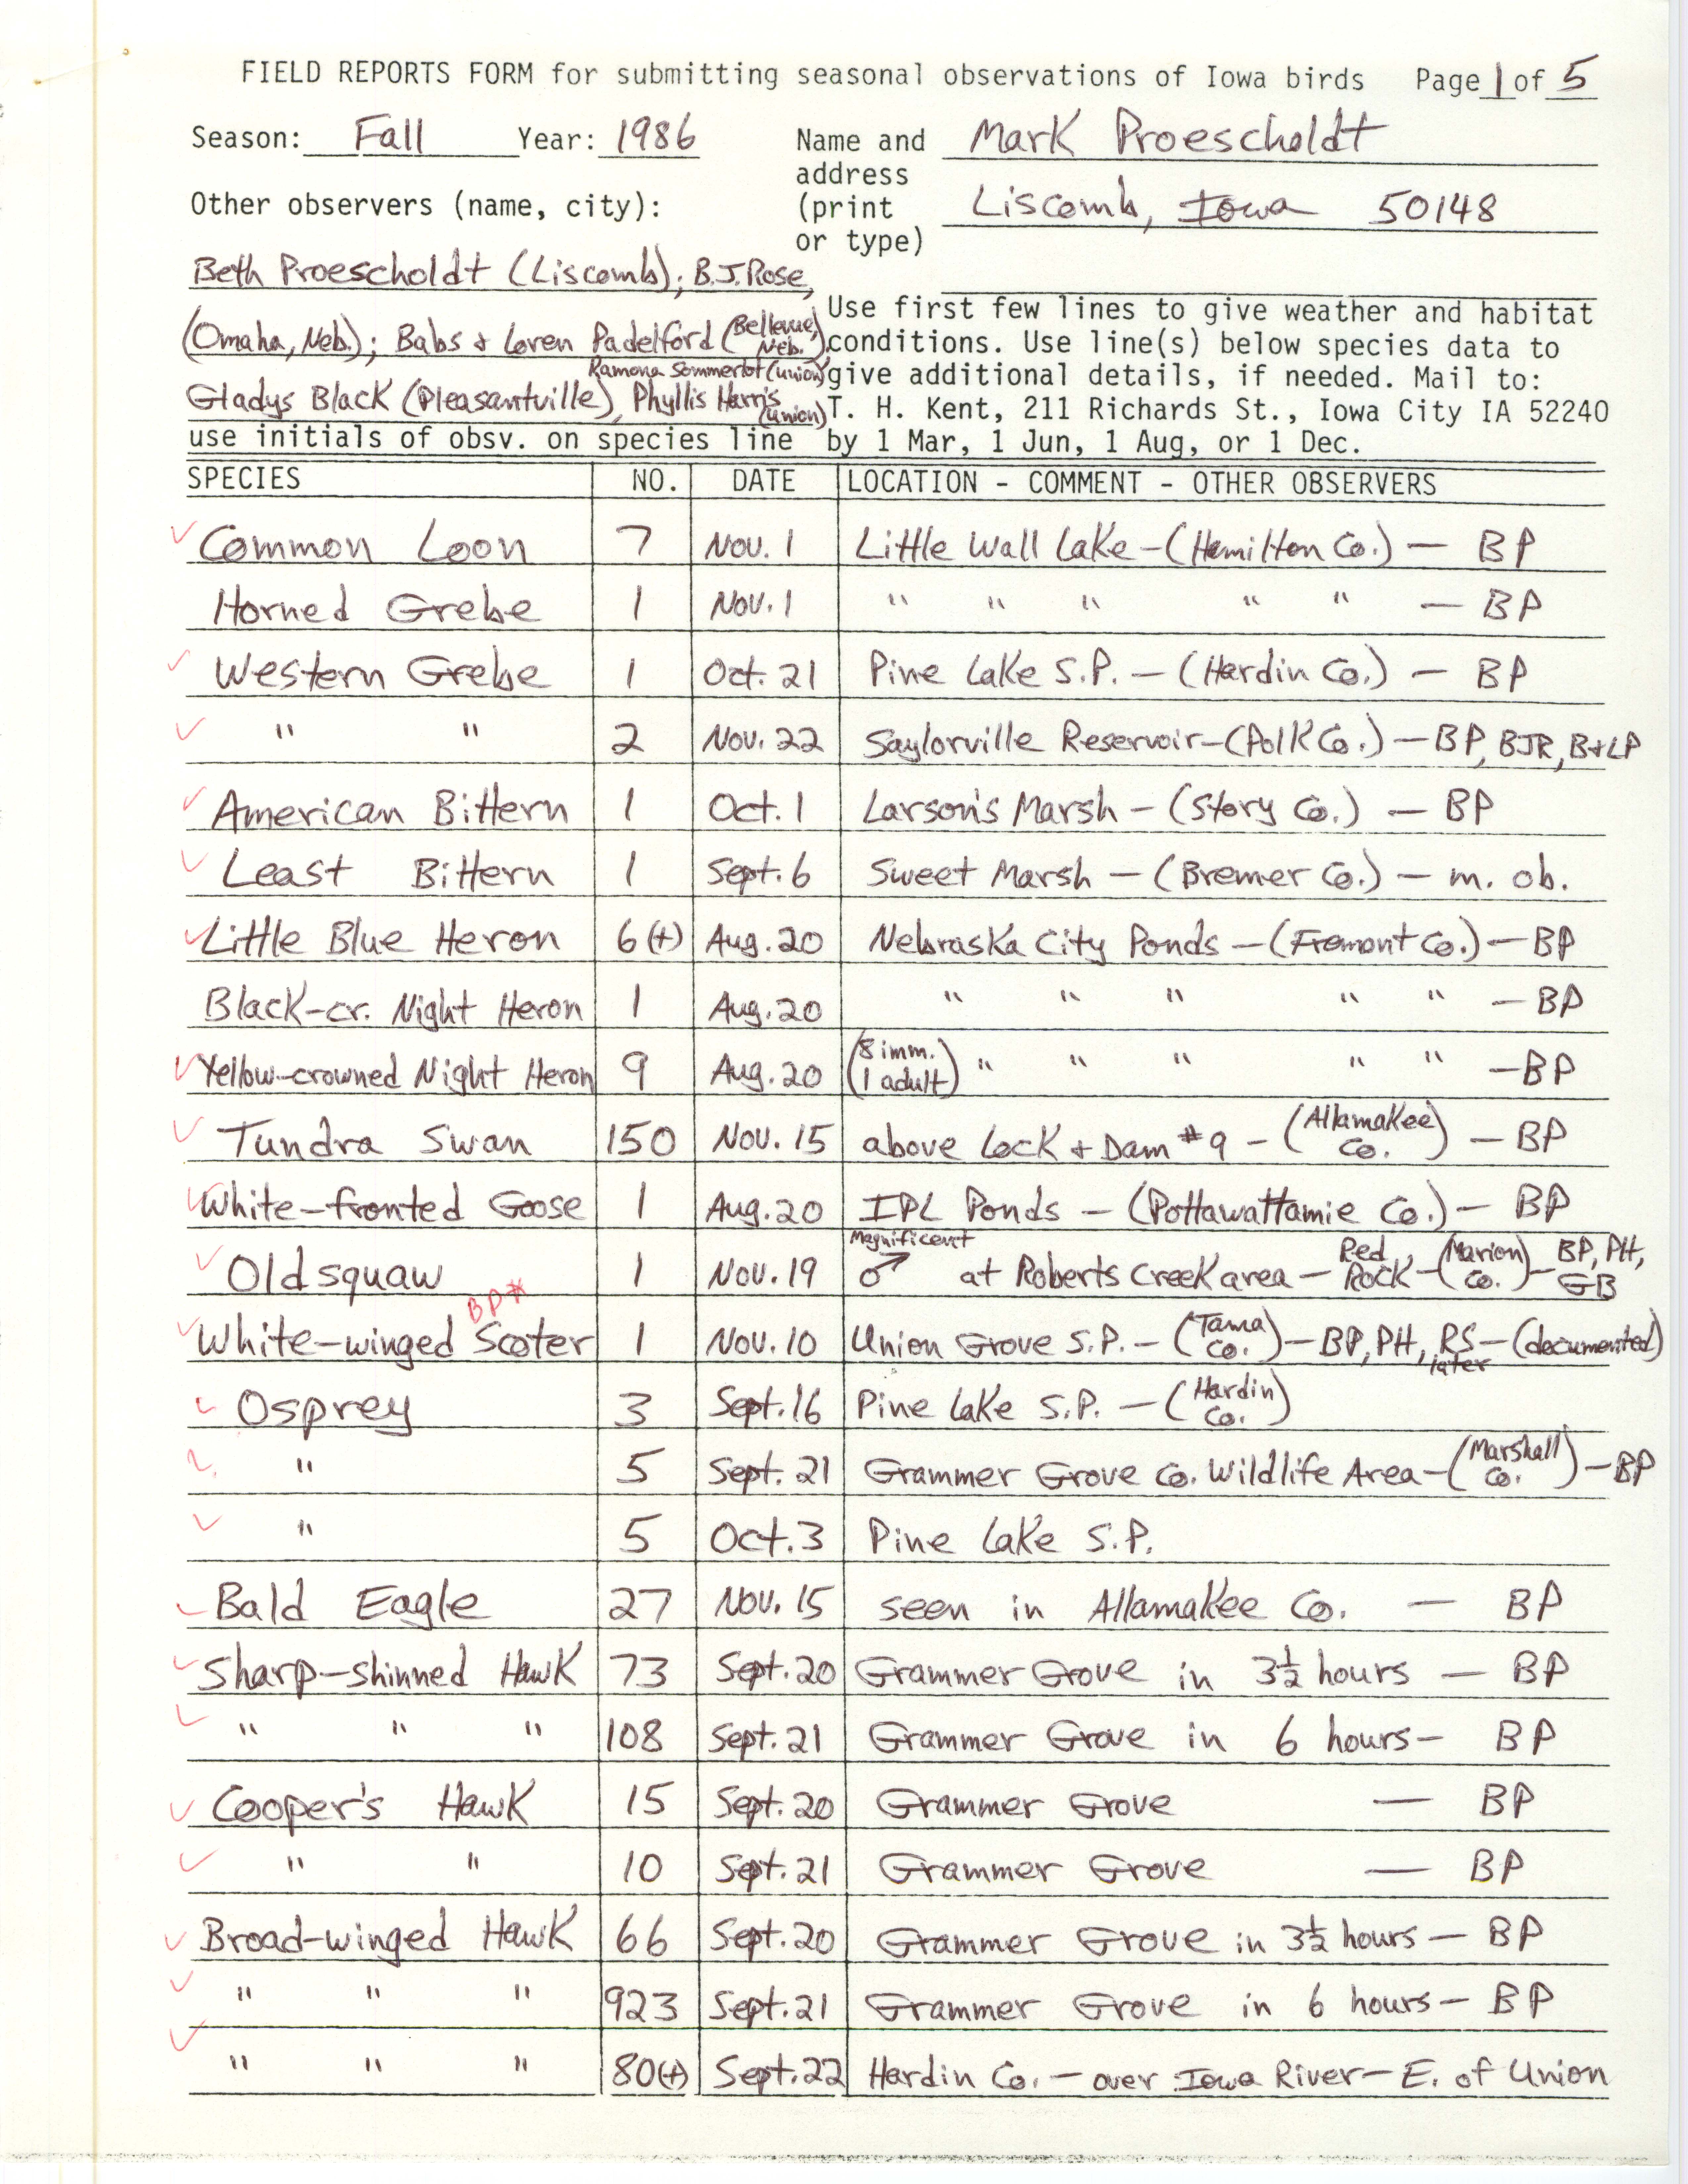 Field reports form for submitting seasonal observations of Iowa birds, Mark Proescholdt, fall 1986